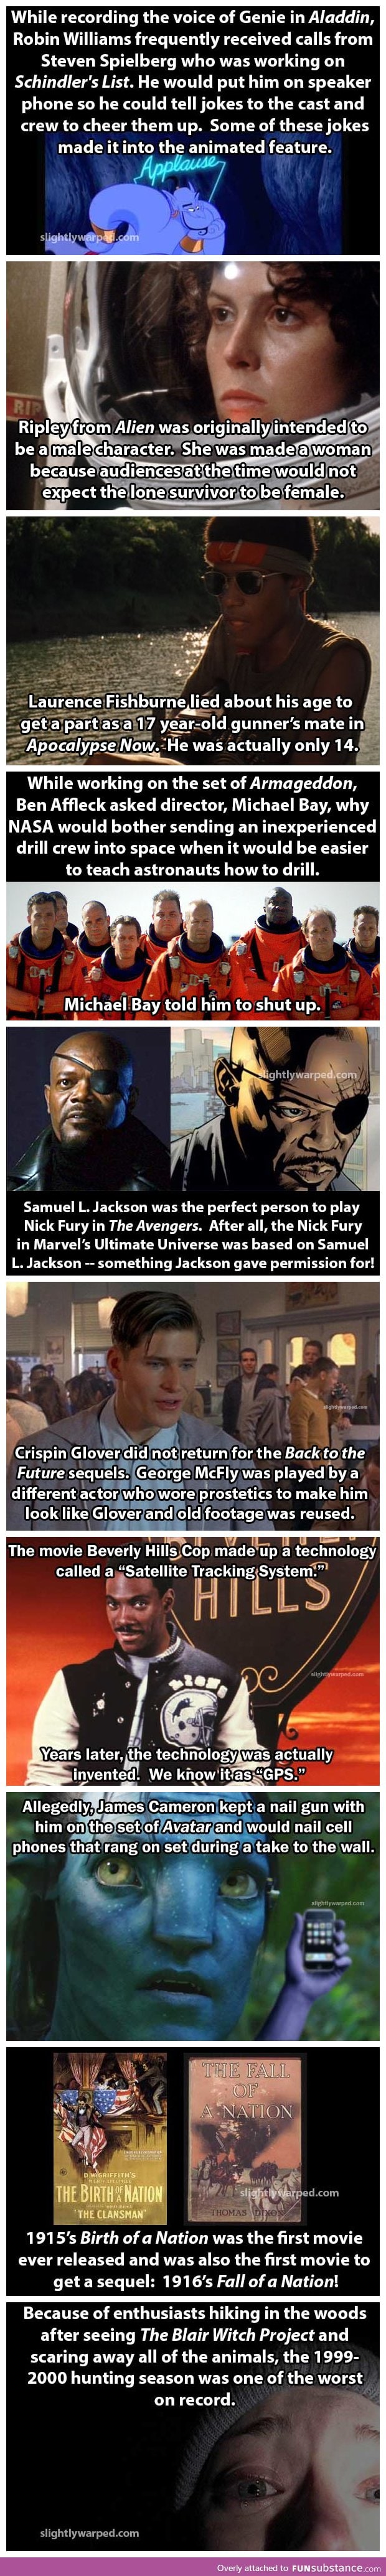 Movie facts